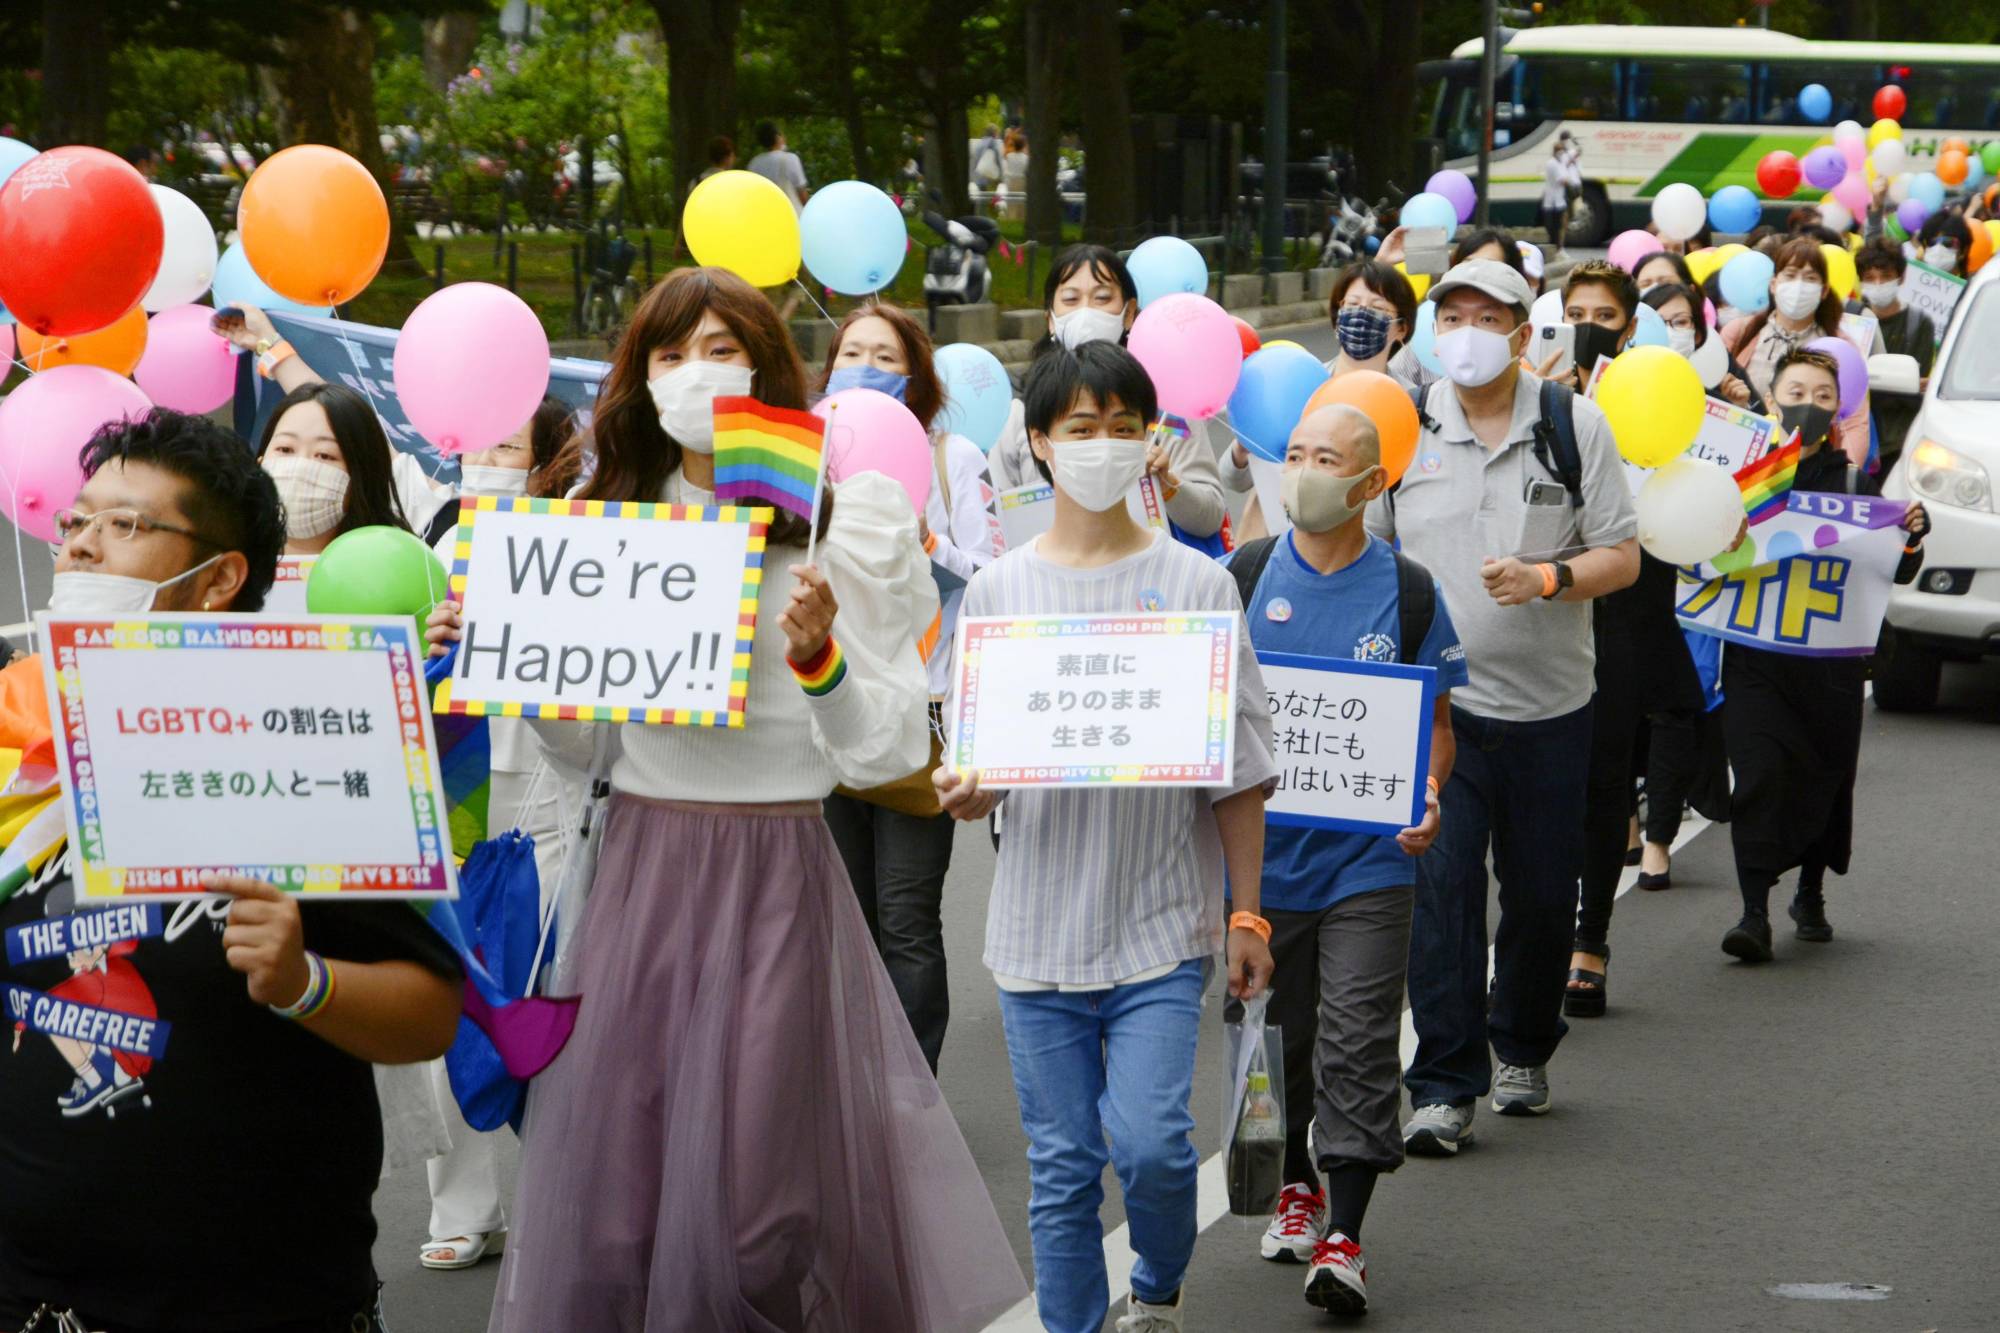 An LGBT parade is held in Sapporo in September. | KYODO